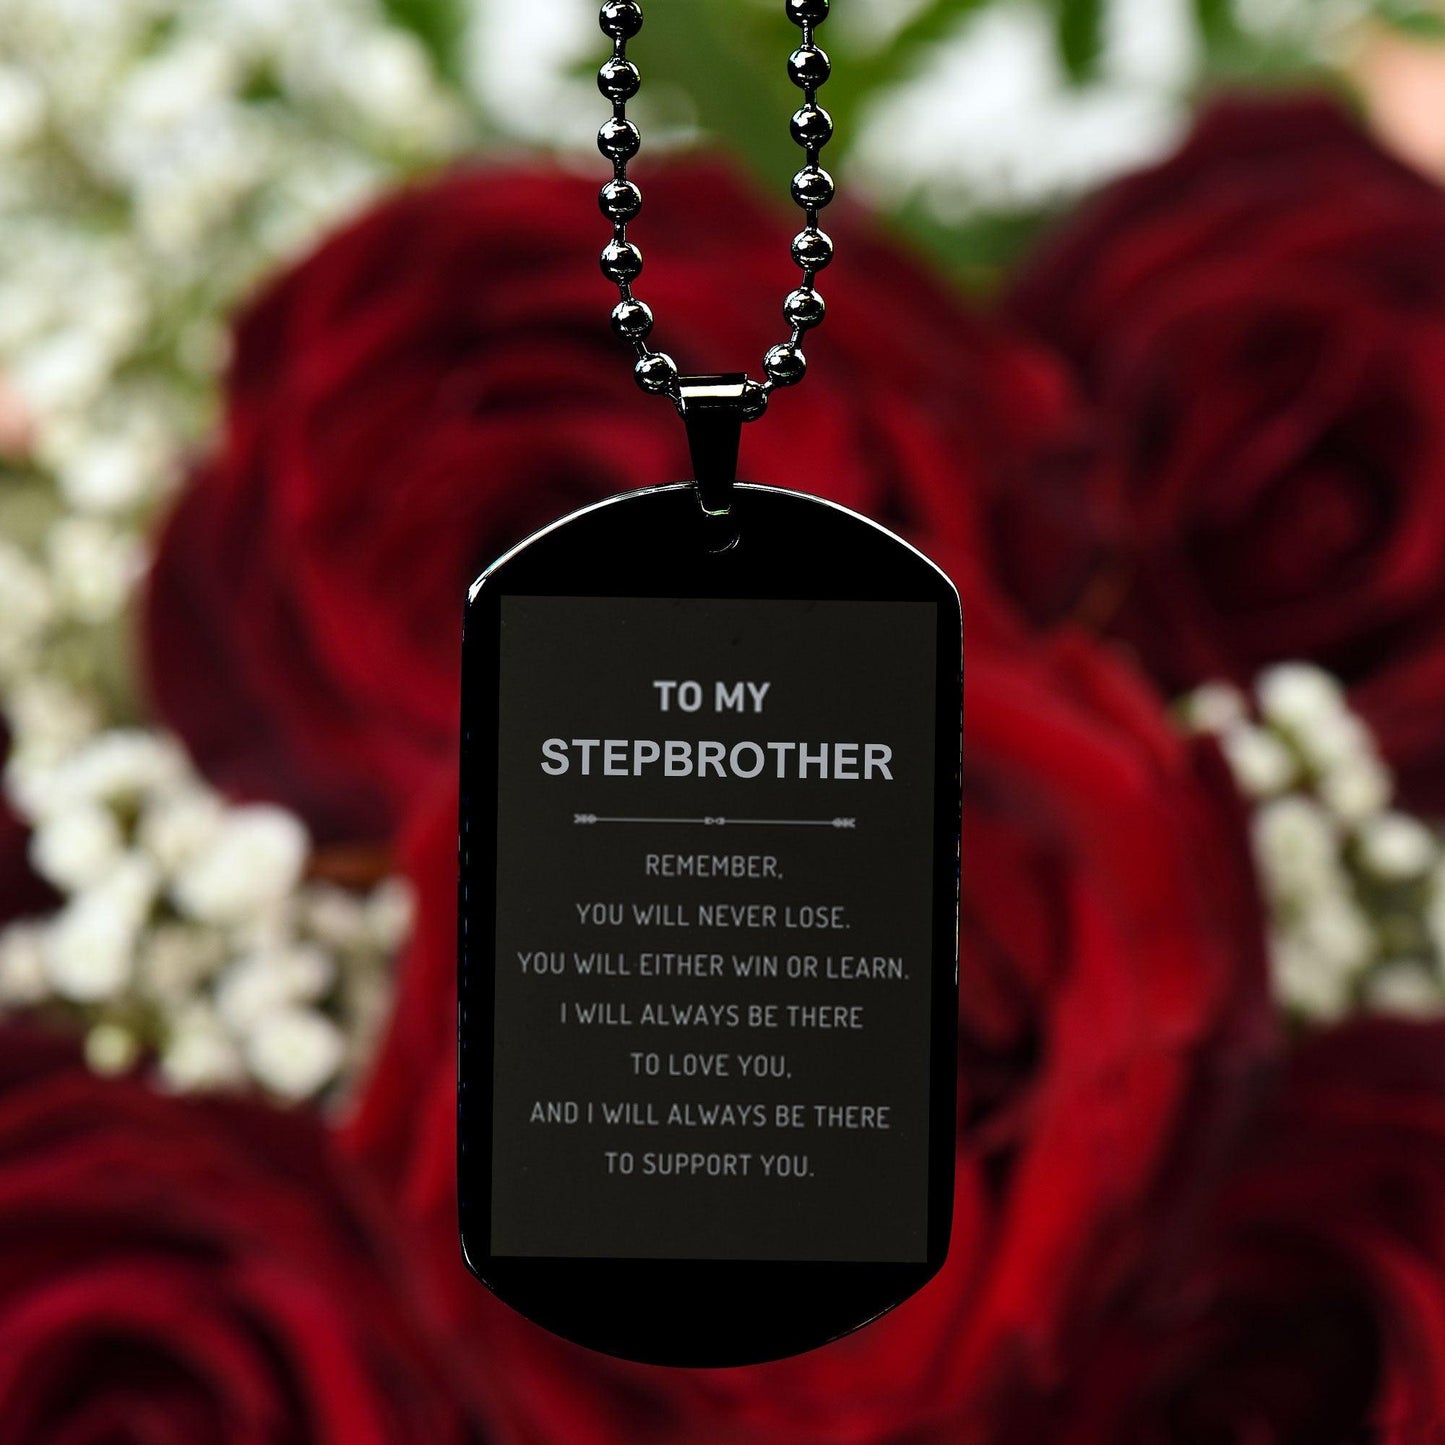 Stepbrother Gifts, To My Stepbrother Remember, you will never lose. You will either WIN or LEARN, Keepsake Black Dog Tag For Stepbrother Engraved, Birthday Christmas Gifts Ideas For Stepbrother X-mas Gifts